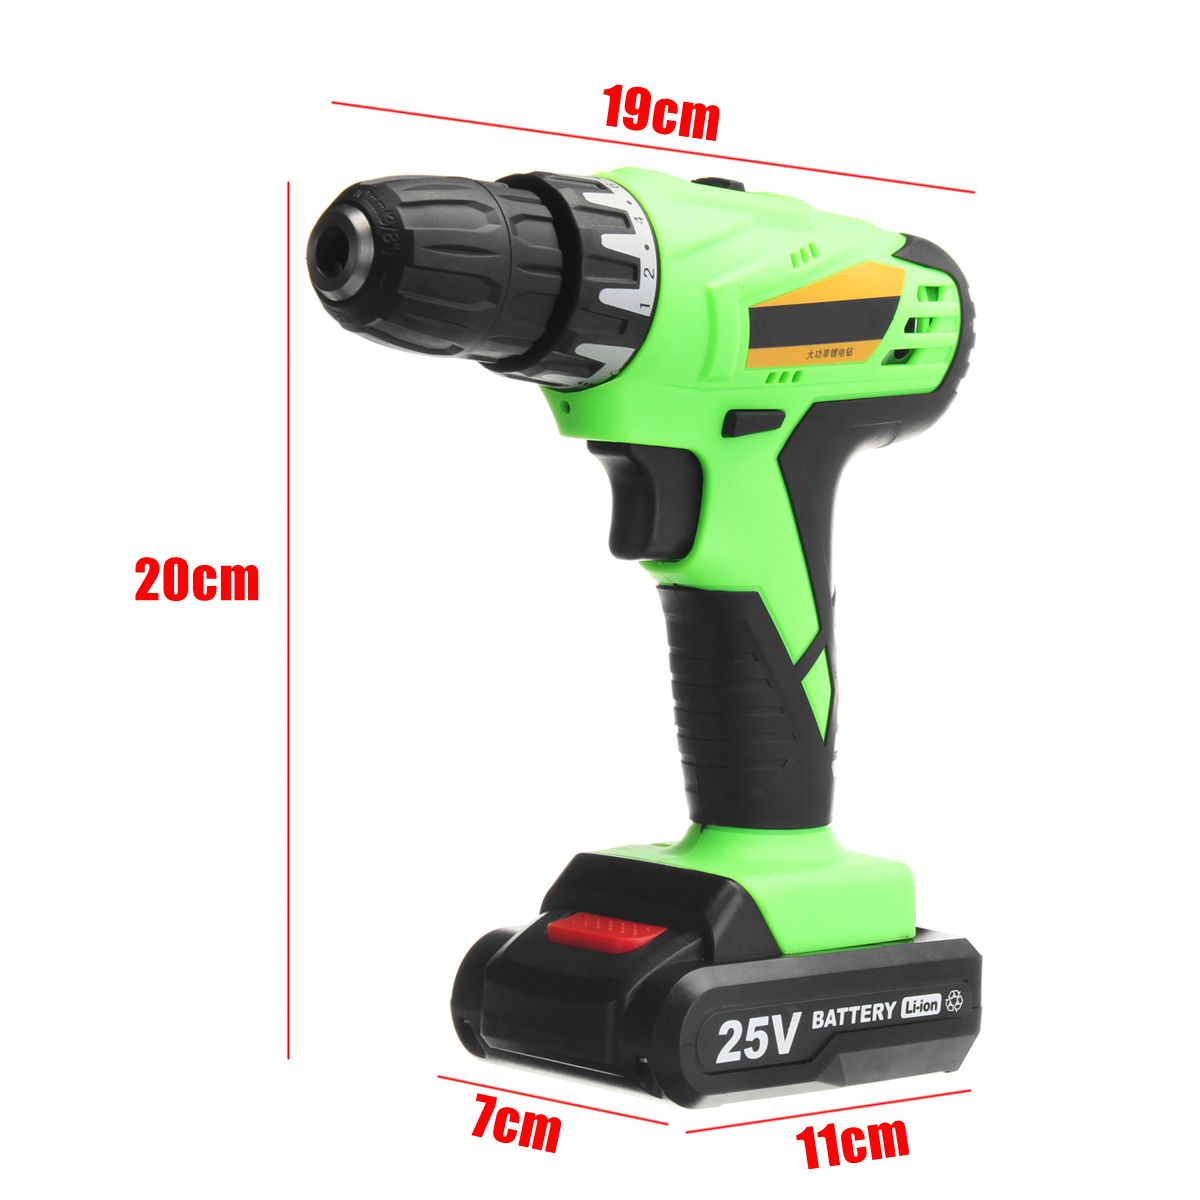 25V-Cordless-Power-Drill-2-Lithium-Ion-Battery-Rechargeable-Electric-Screwdriver-Kit-1275028